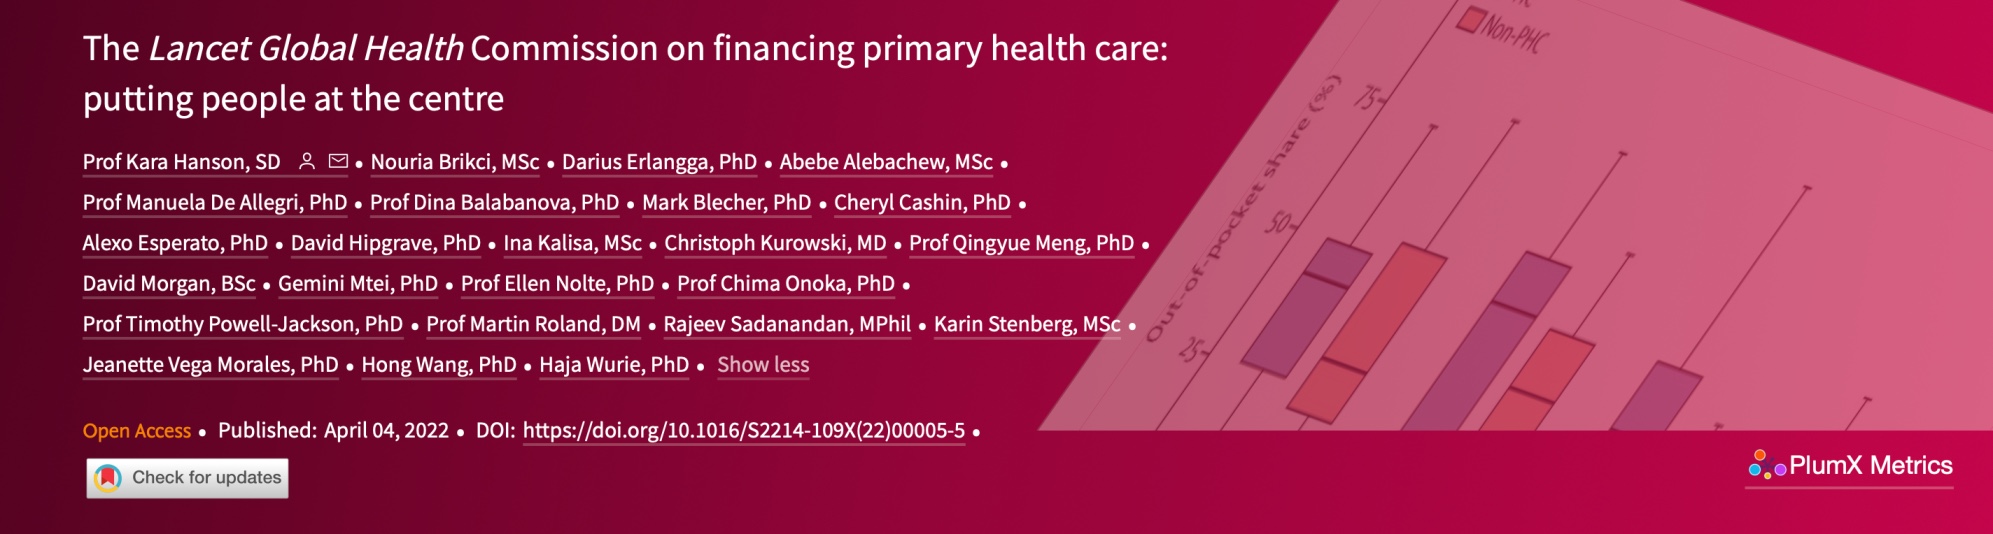 The Lancet Global Health Commission on financing primary health care: putting people at the centre